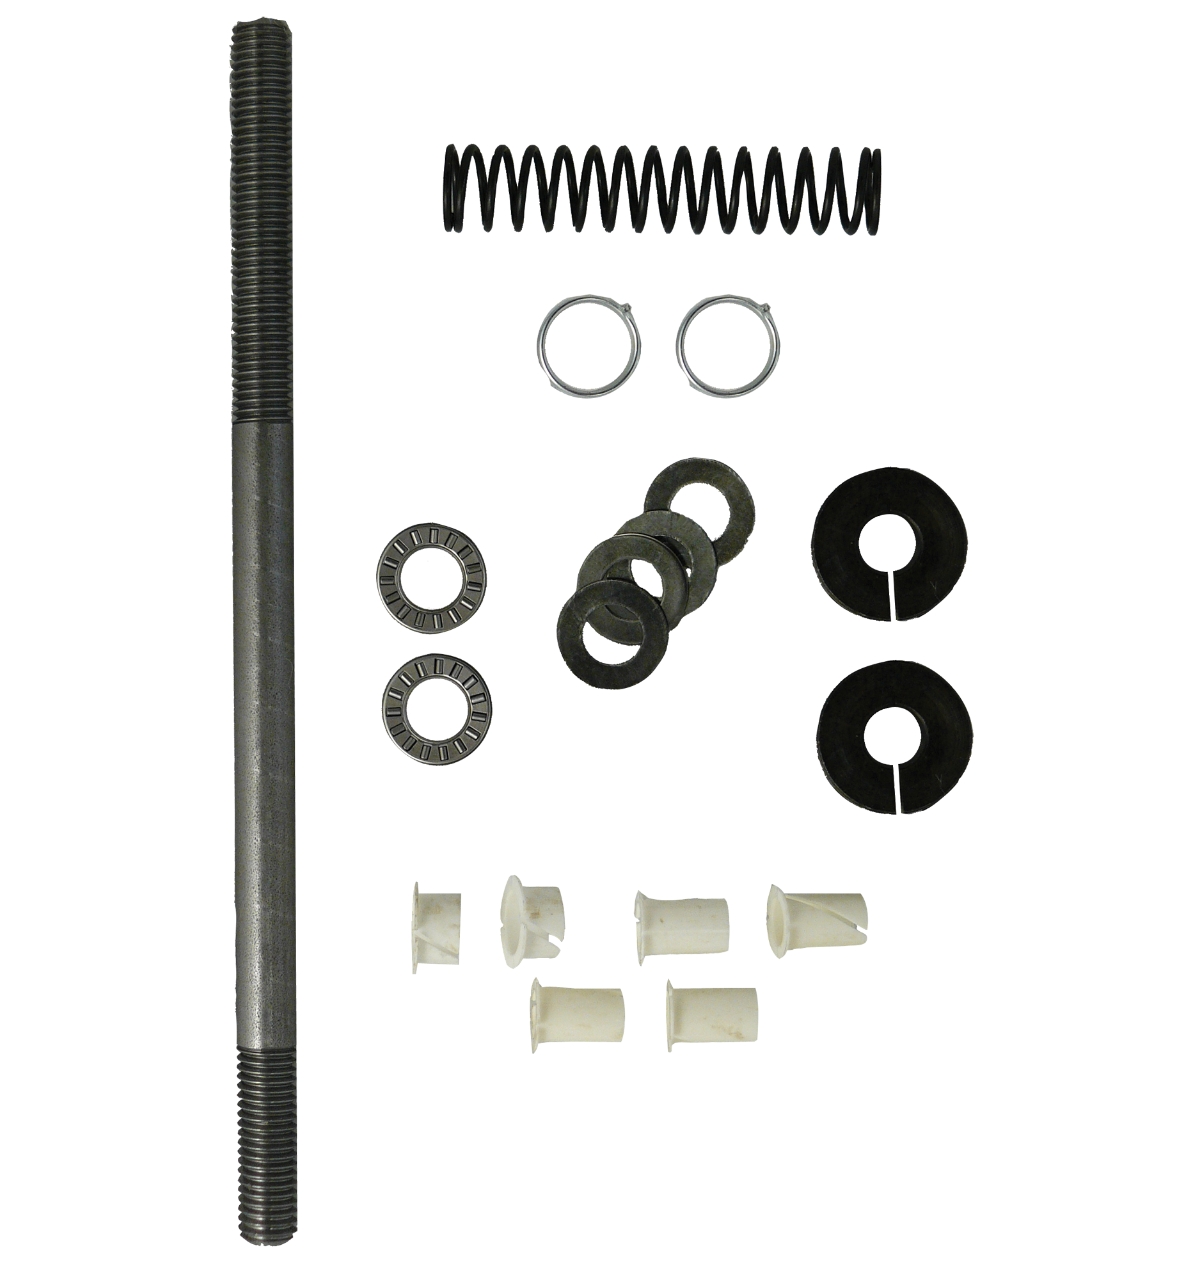 TS-RK Park Tool TS-2 Truing Stand Rebuild and Upgrade Kit 